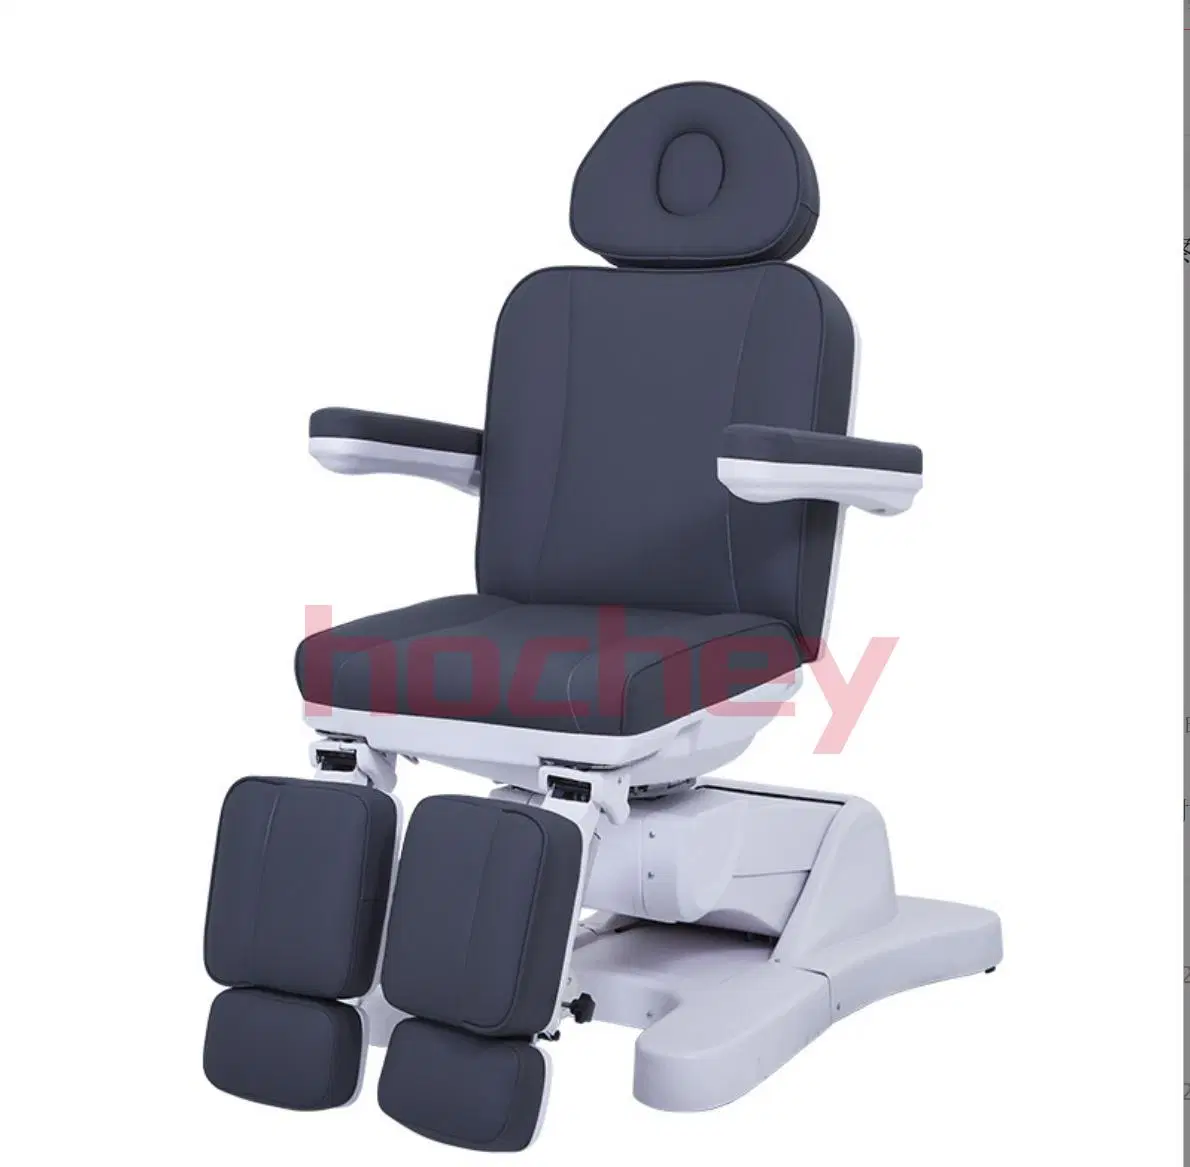 Hochey Electric 5 Motors Beauty Chair Bed Massage Chair Beauty Salon Table Full Function Beauty Chairs